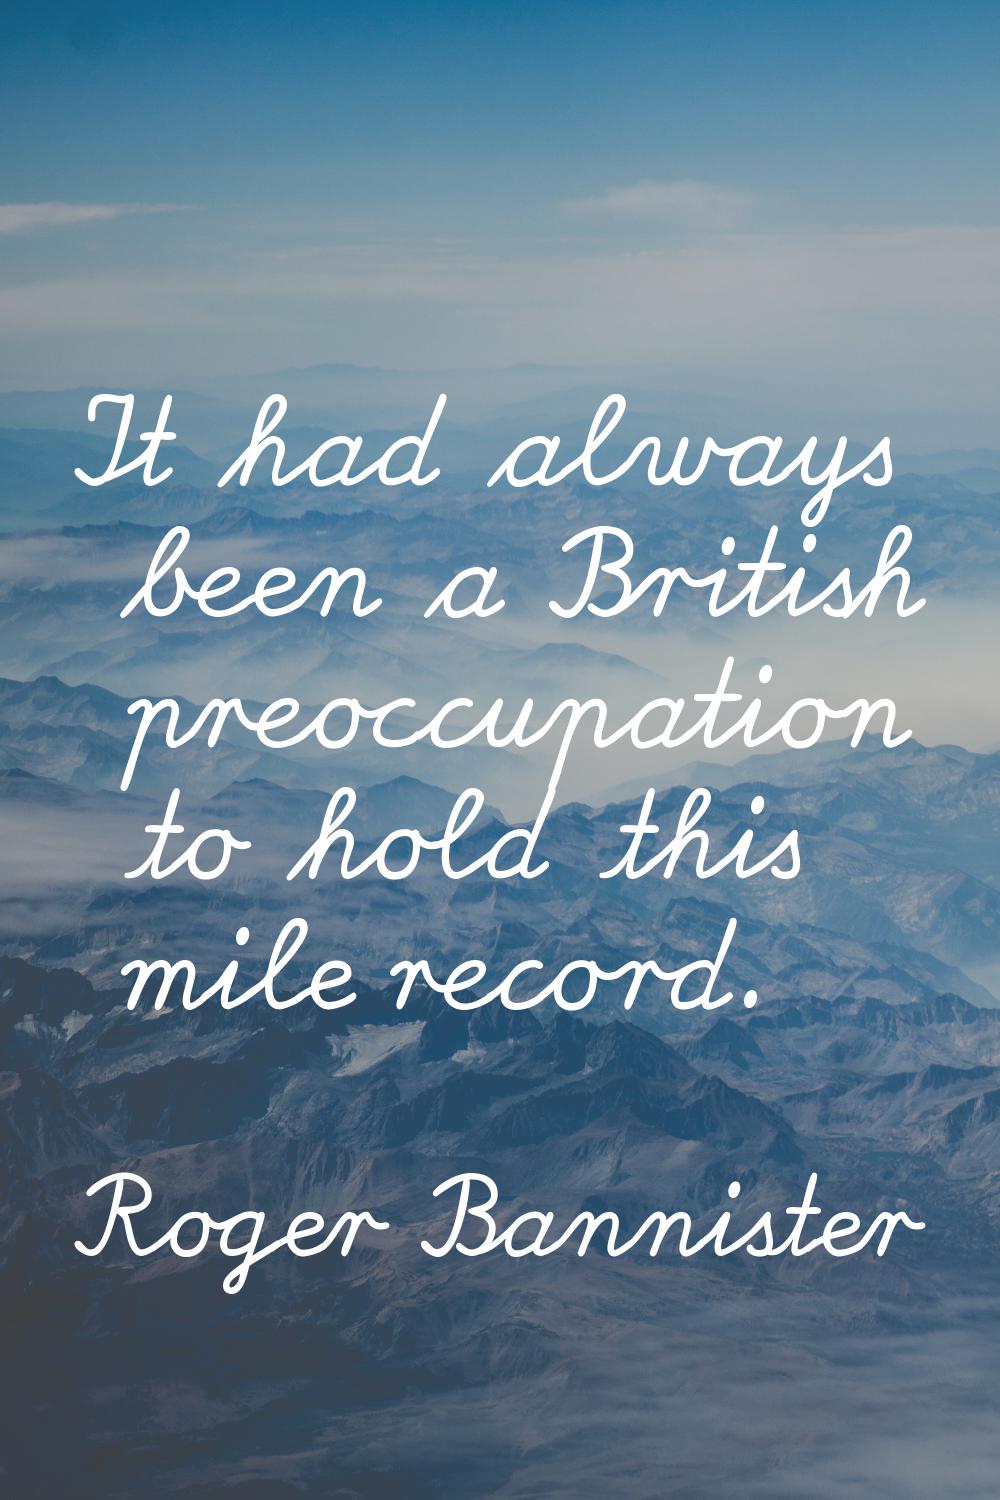 It had always been a British preoccupation to hold this mile record.